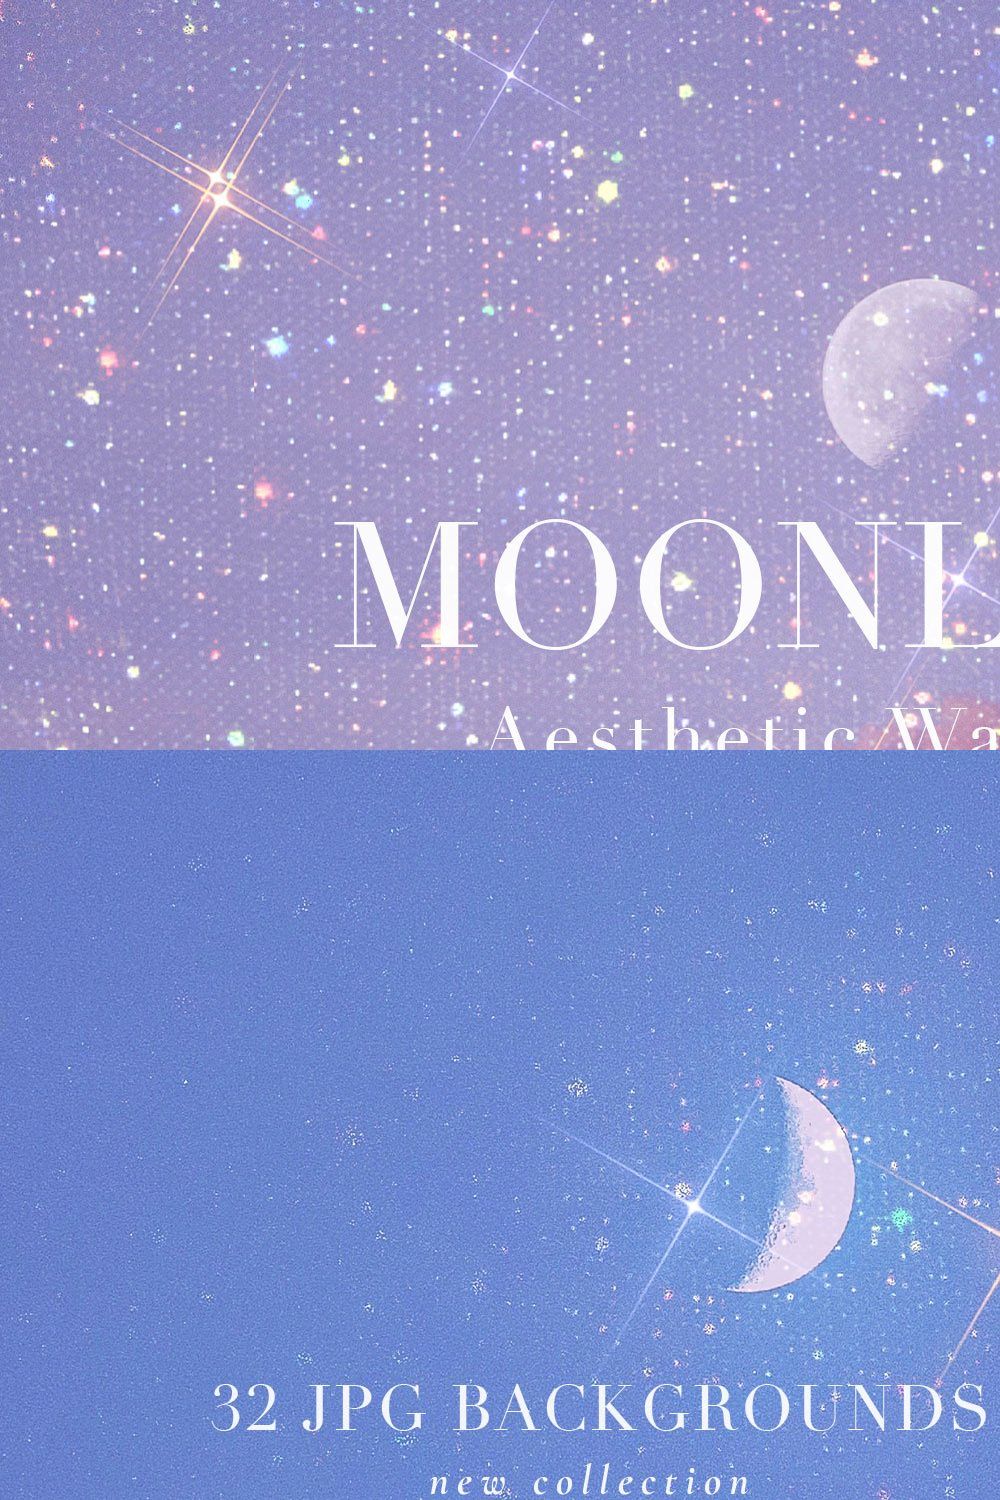 Moonlight I Aesthetic Backgrounds pinterest preview image.